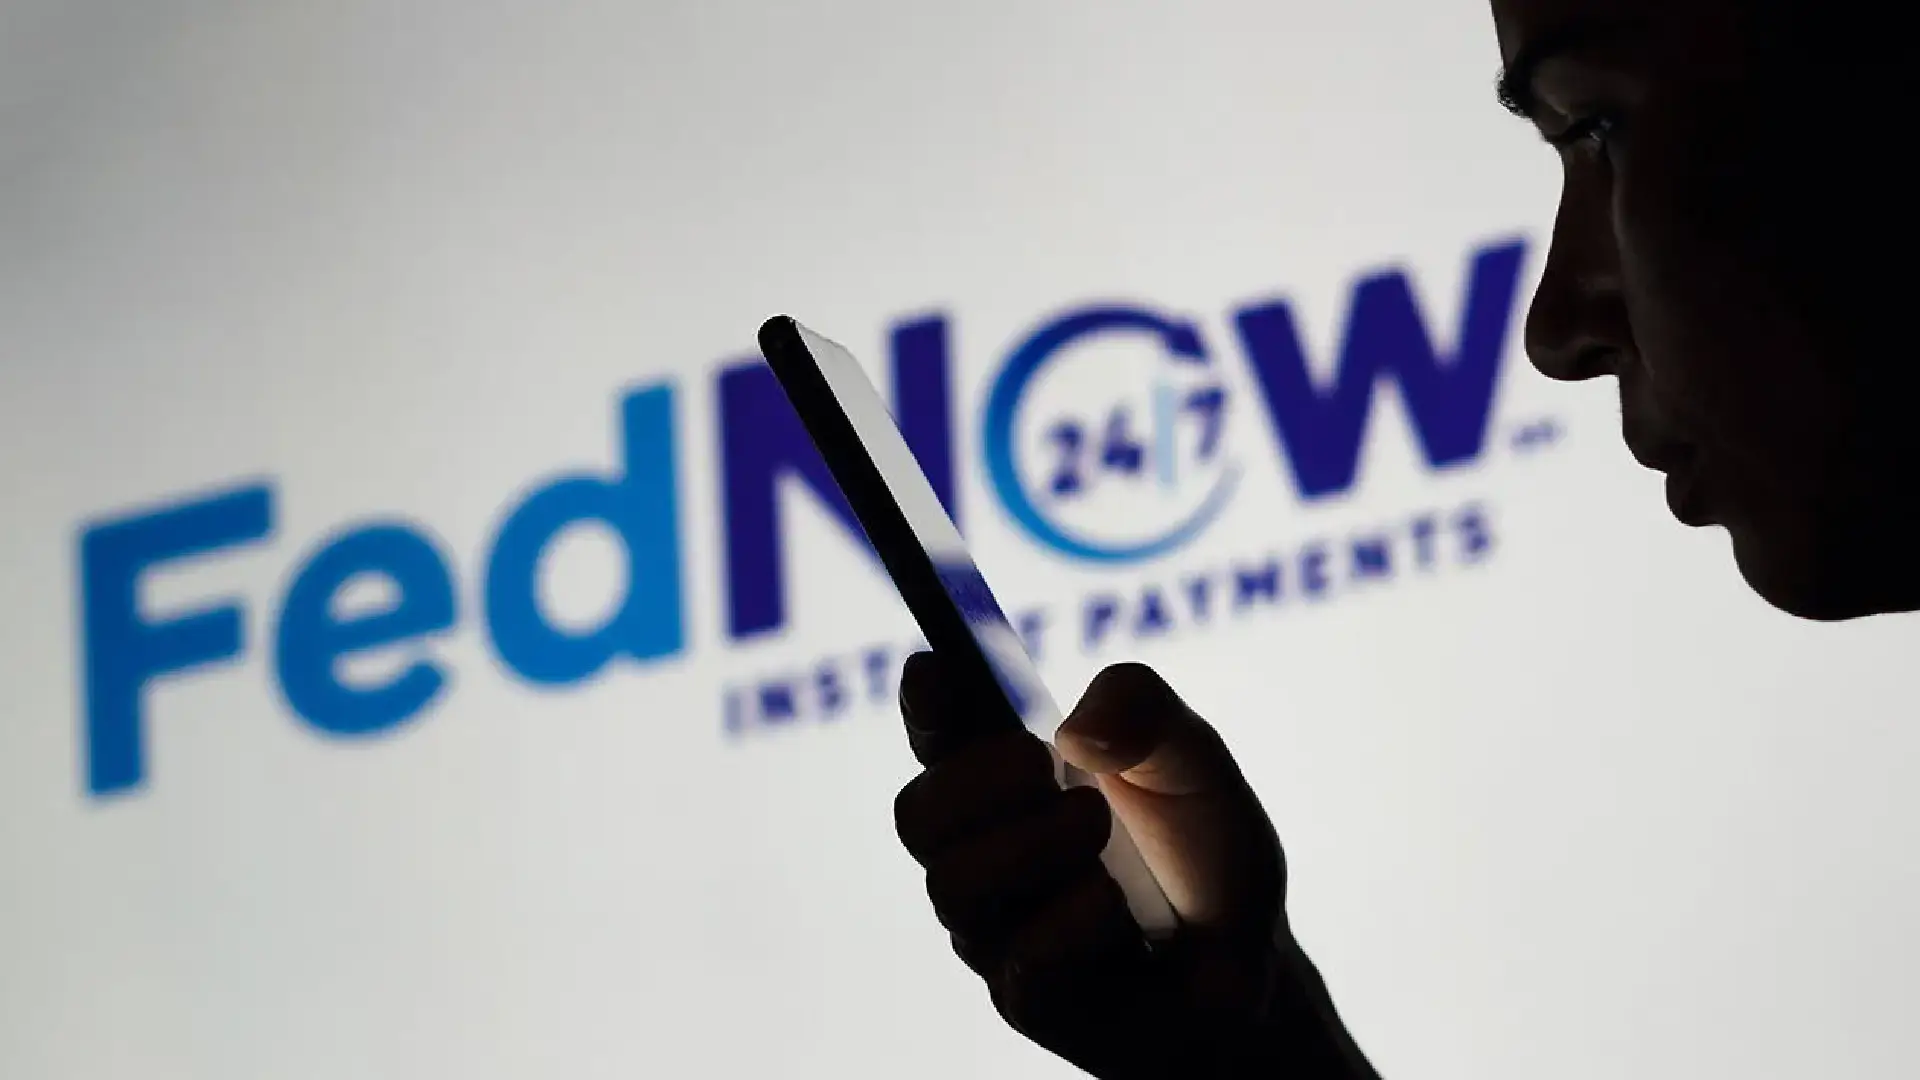 FedNow: U.S. Government Launches Instant Payment System, Revolutionizing Transactions